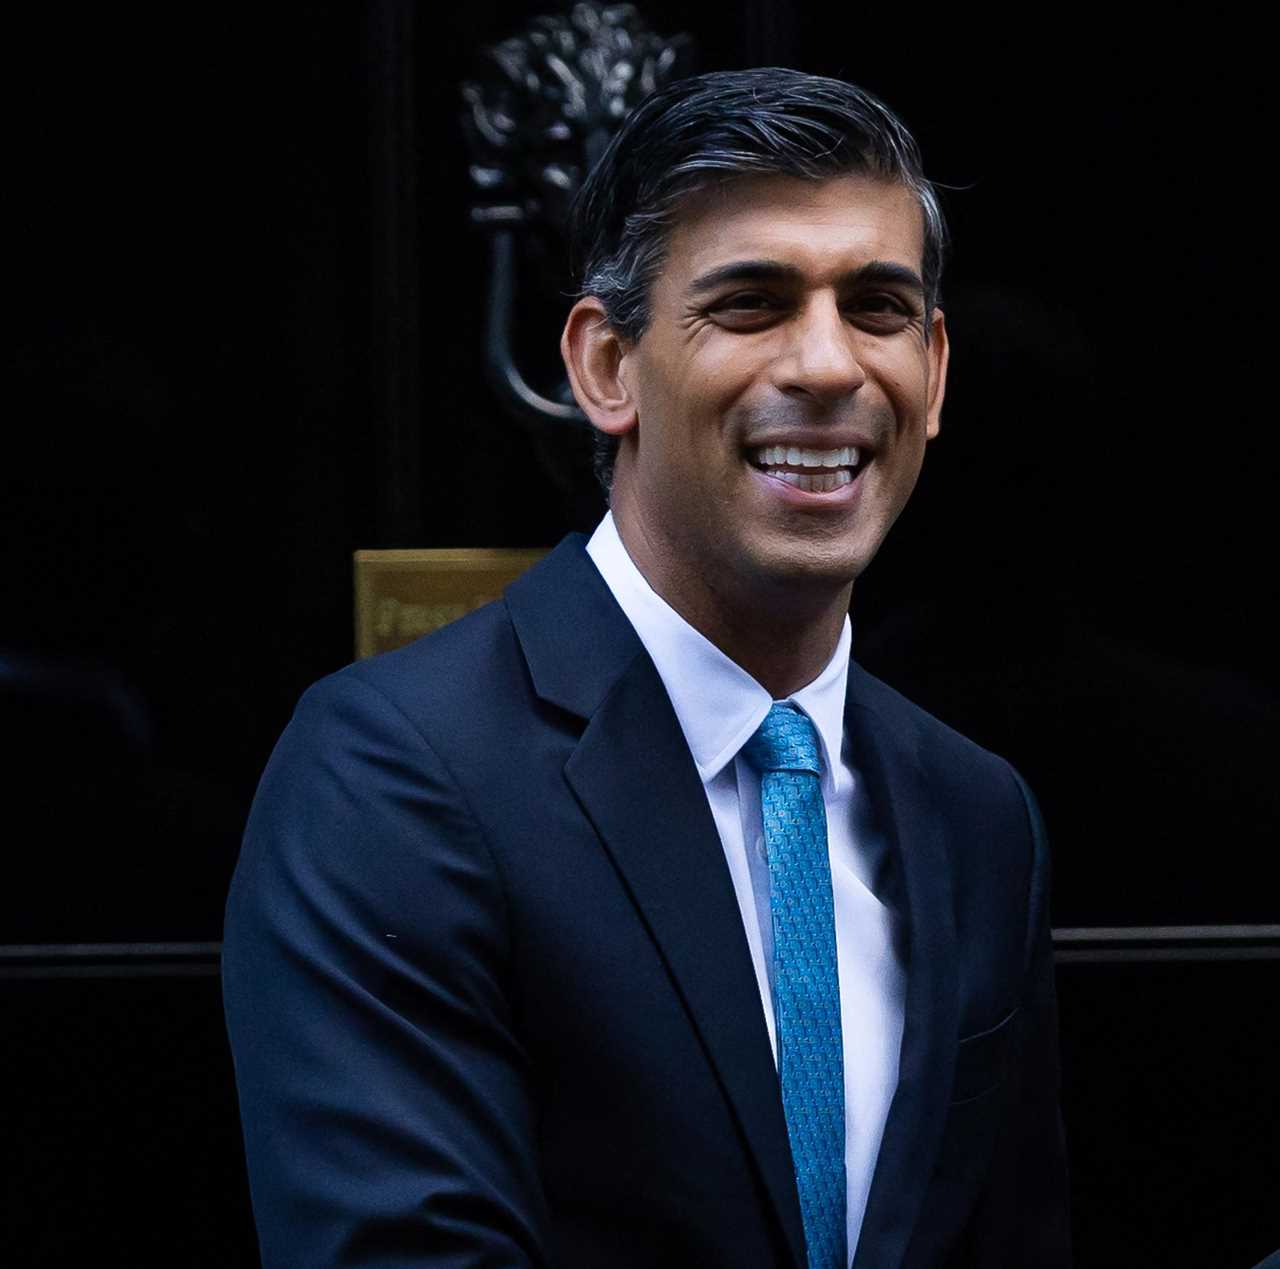 Government splurged £1.3m on sculpture for Rishi Sunak’s garden amid cost of living crisis